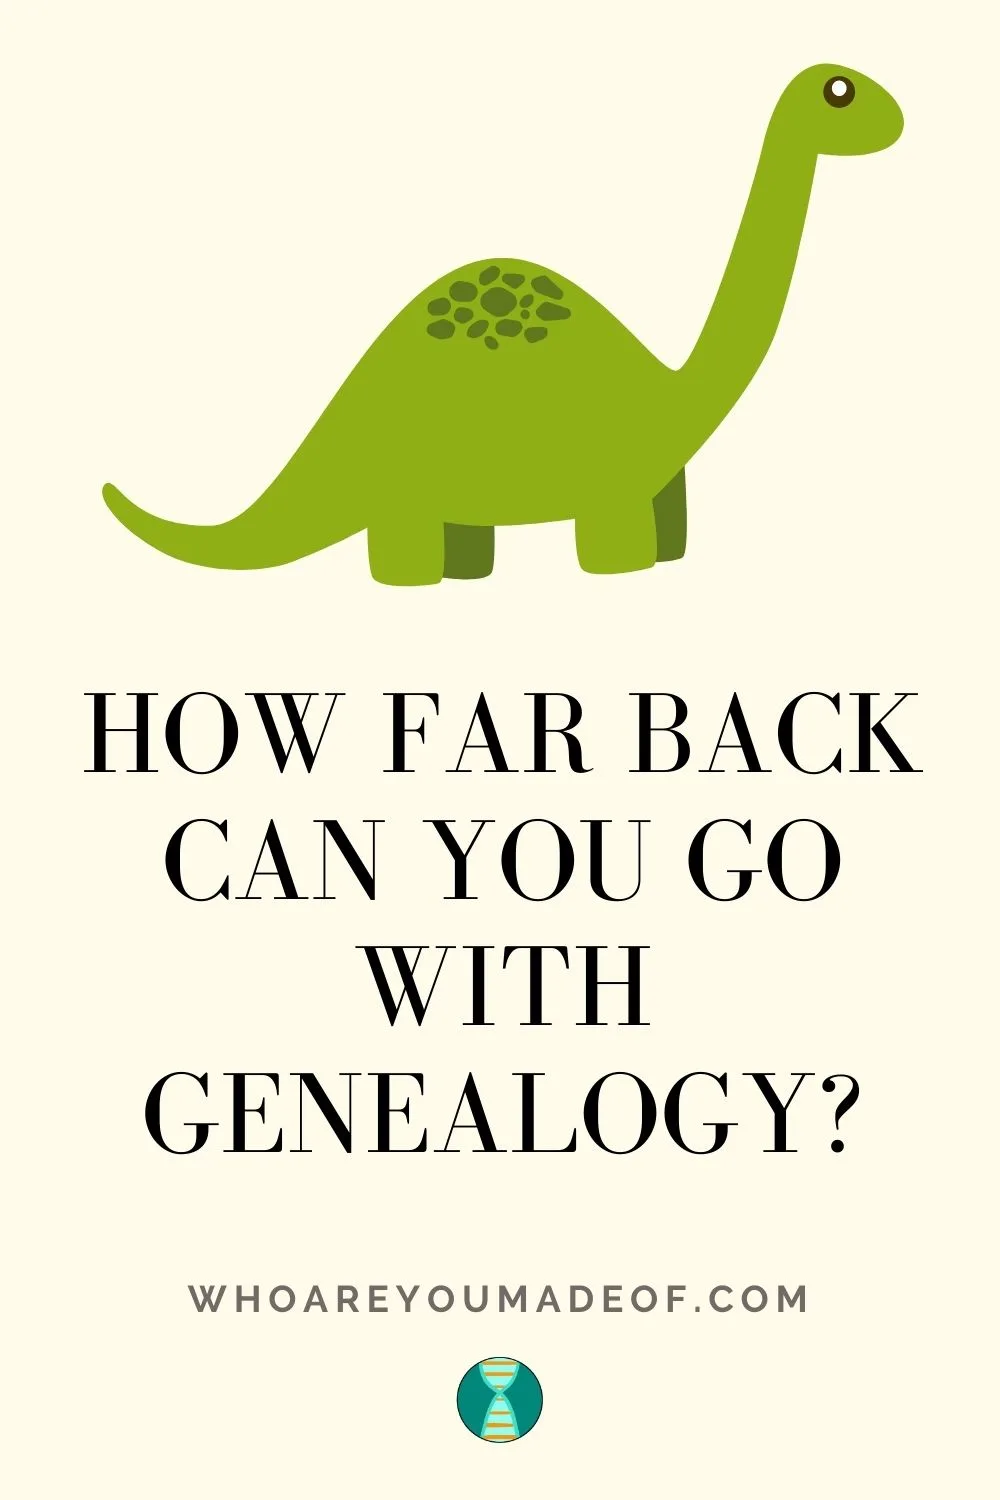 How far back can you go with genealogy, image for pinterest with a dinosaur on it